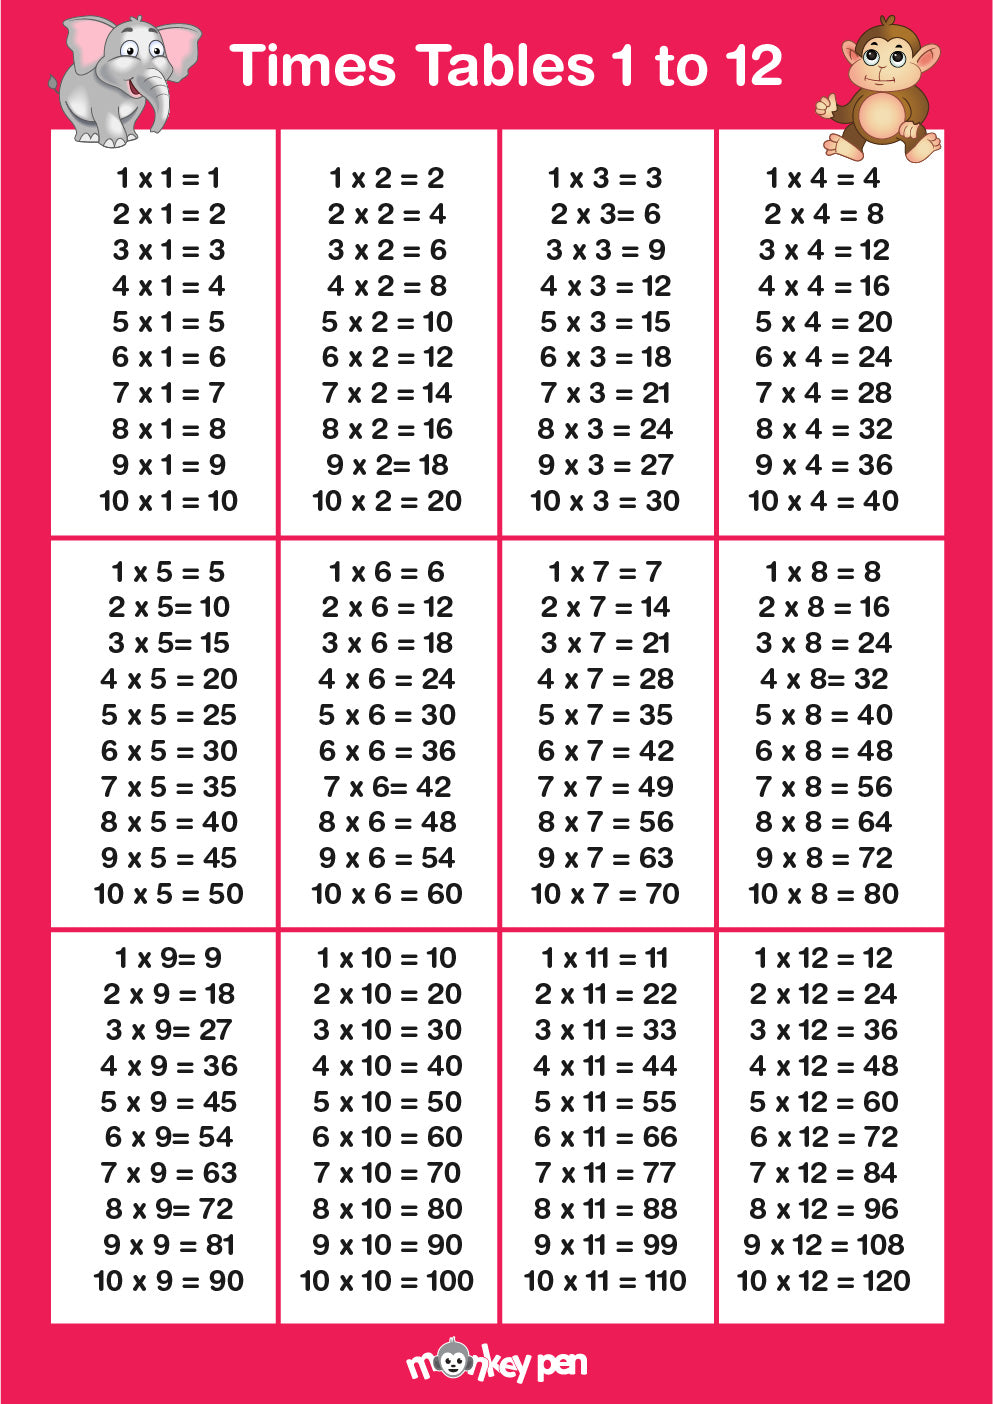 Download Free Times Table Poster – Monkey Pen Store